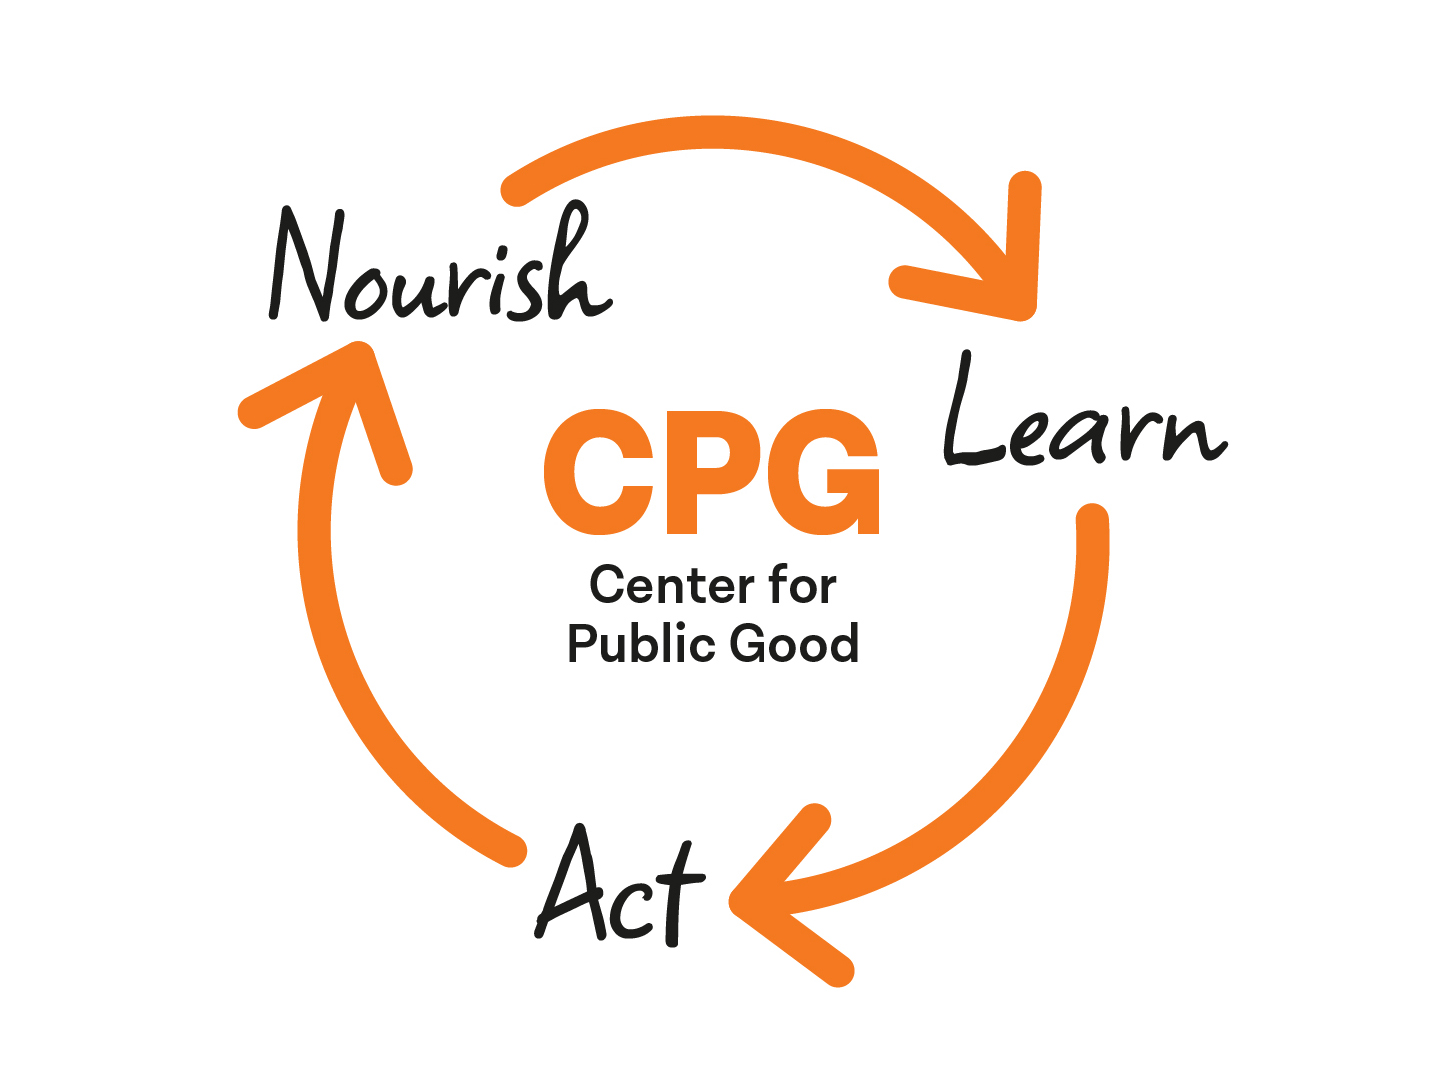 CPG (Center for Public Good) - Nourish, Learn, Act